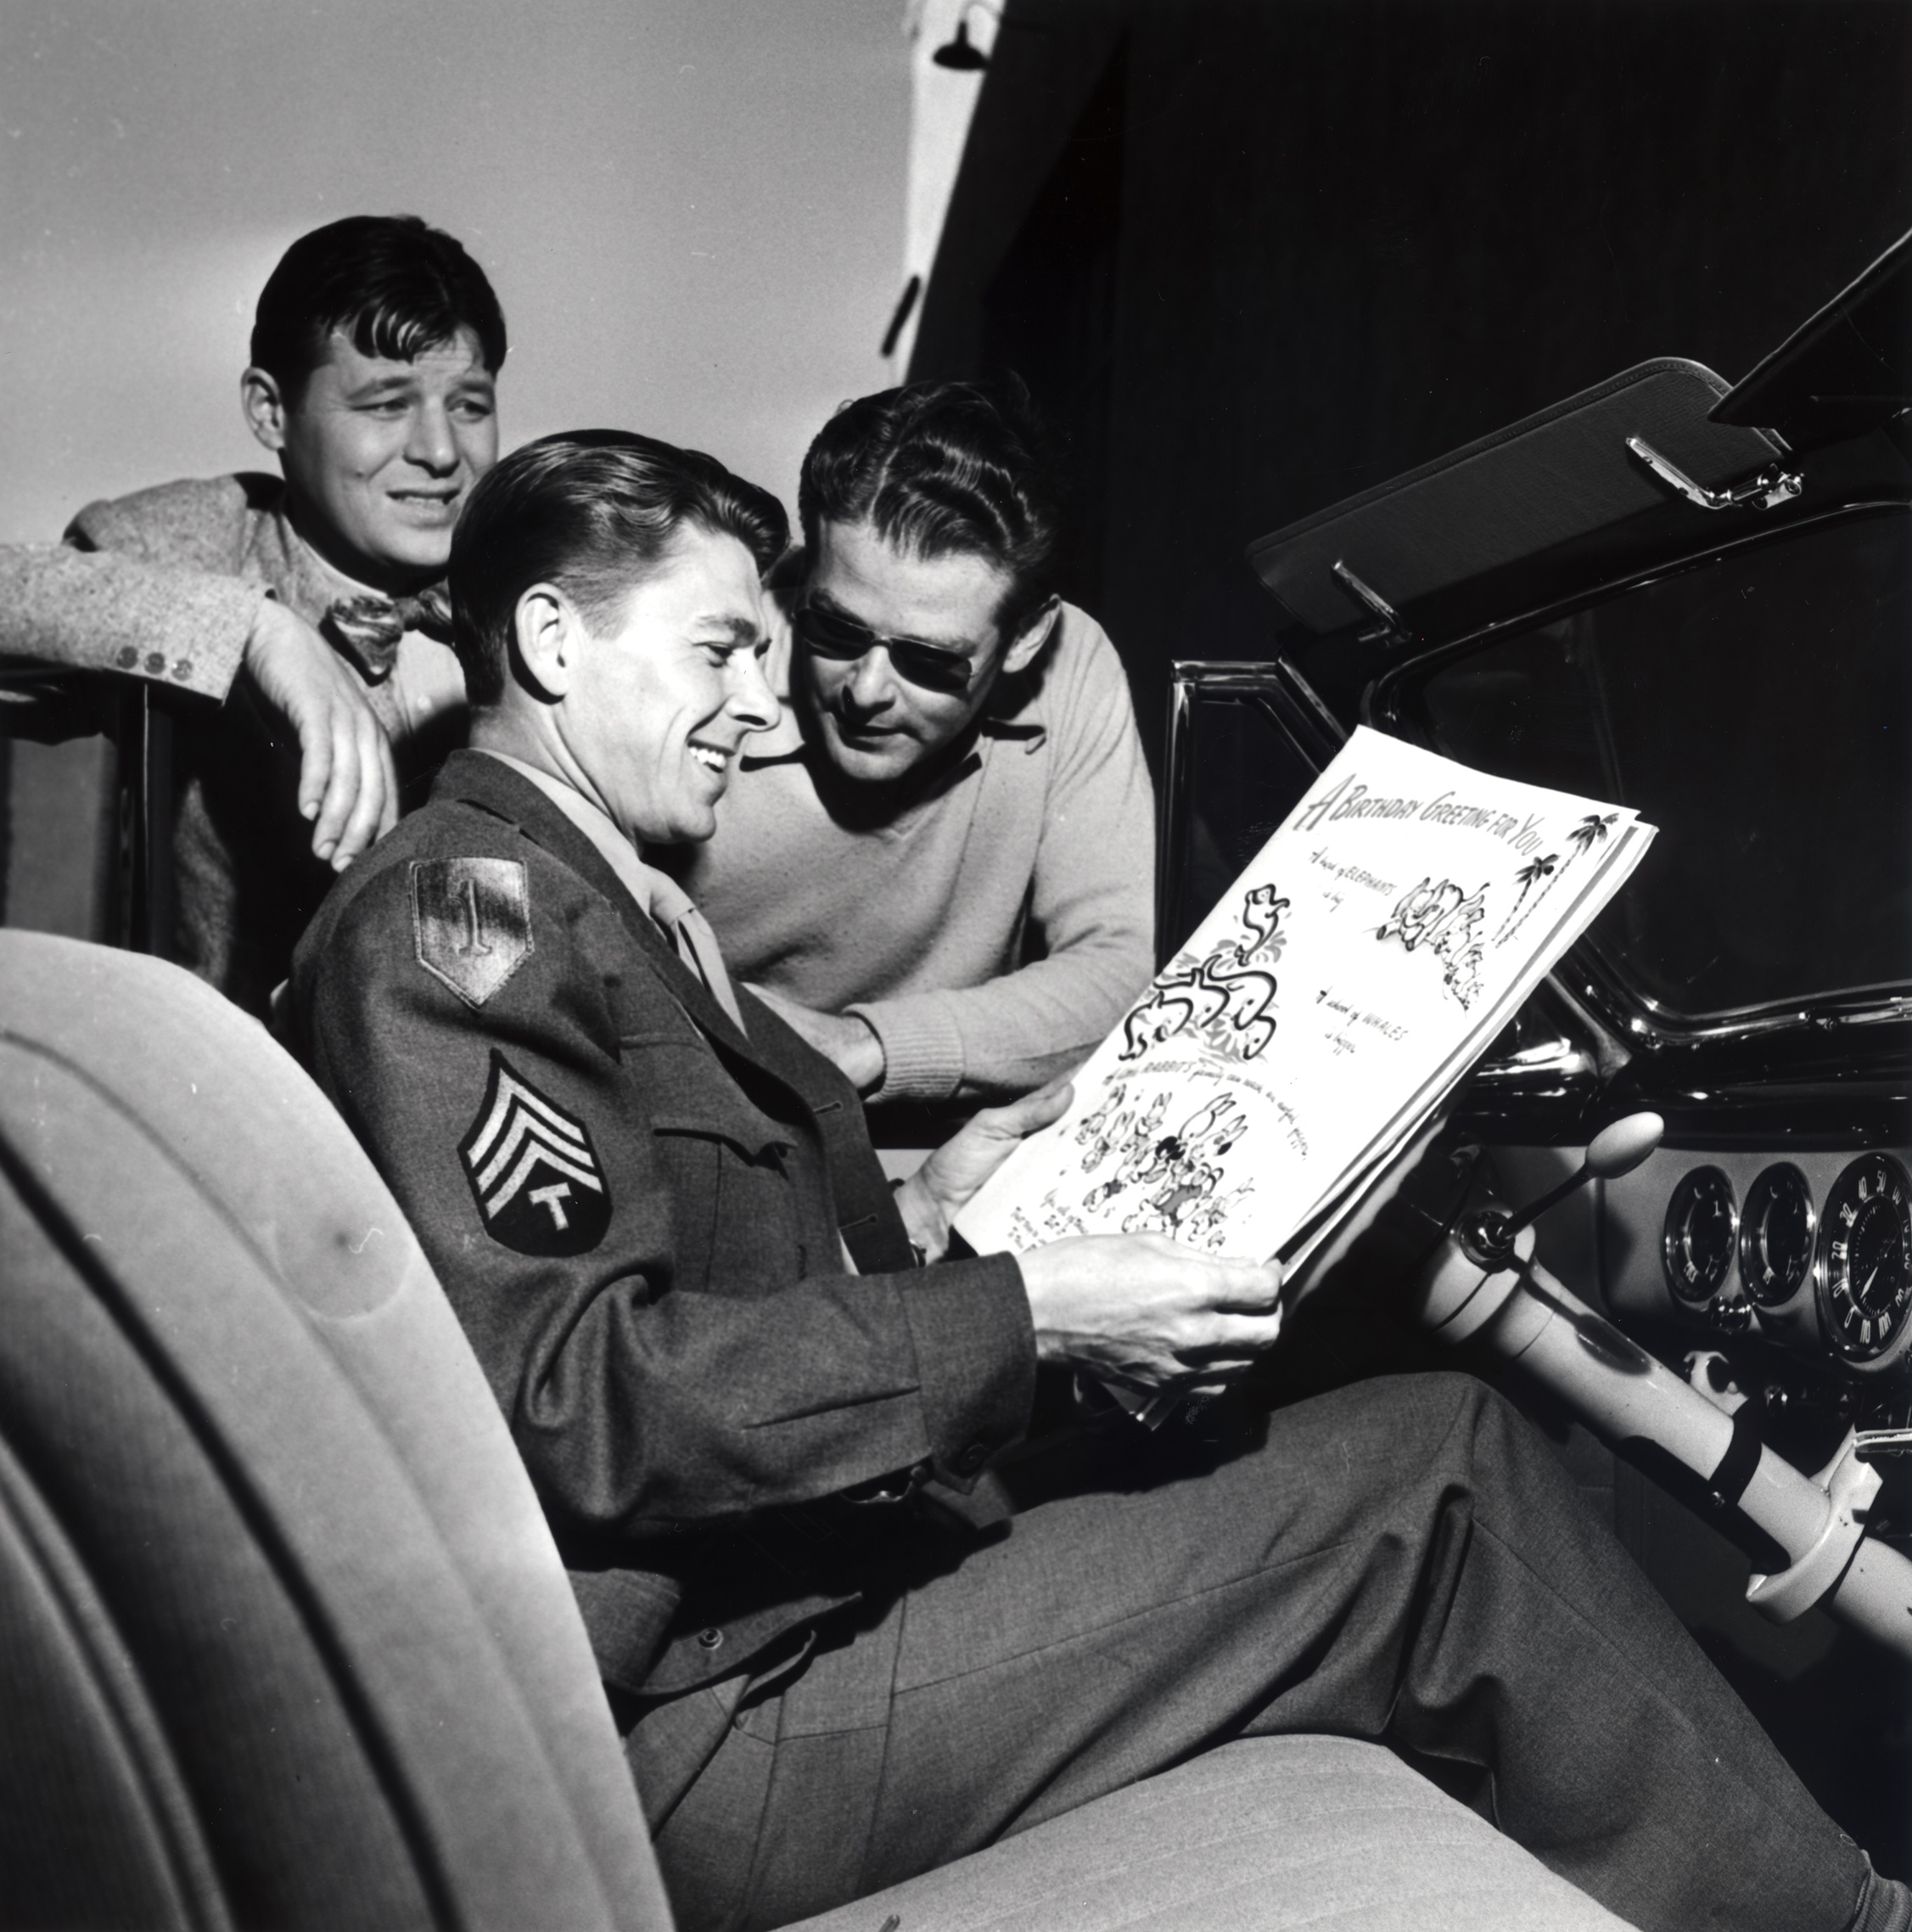 Ronald Reagan, Jack Carson and an unidentified man standing near Reagan who is in a car with a large birthday card